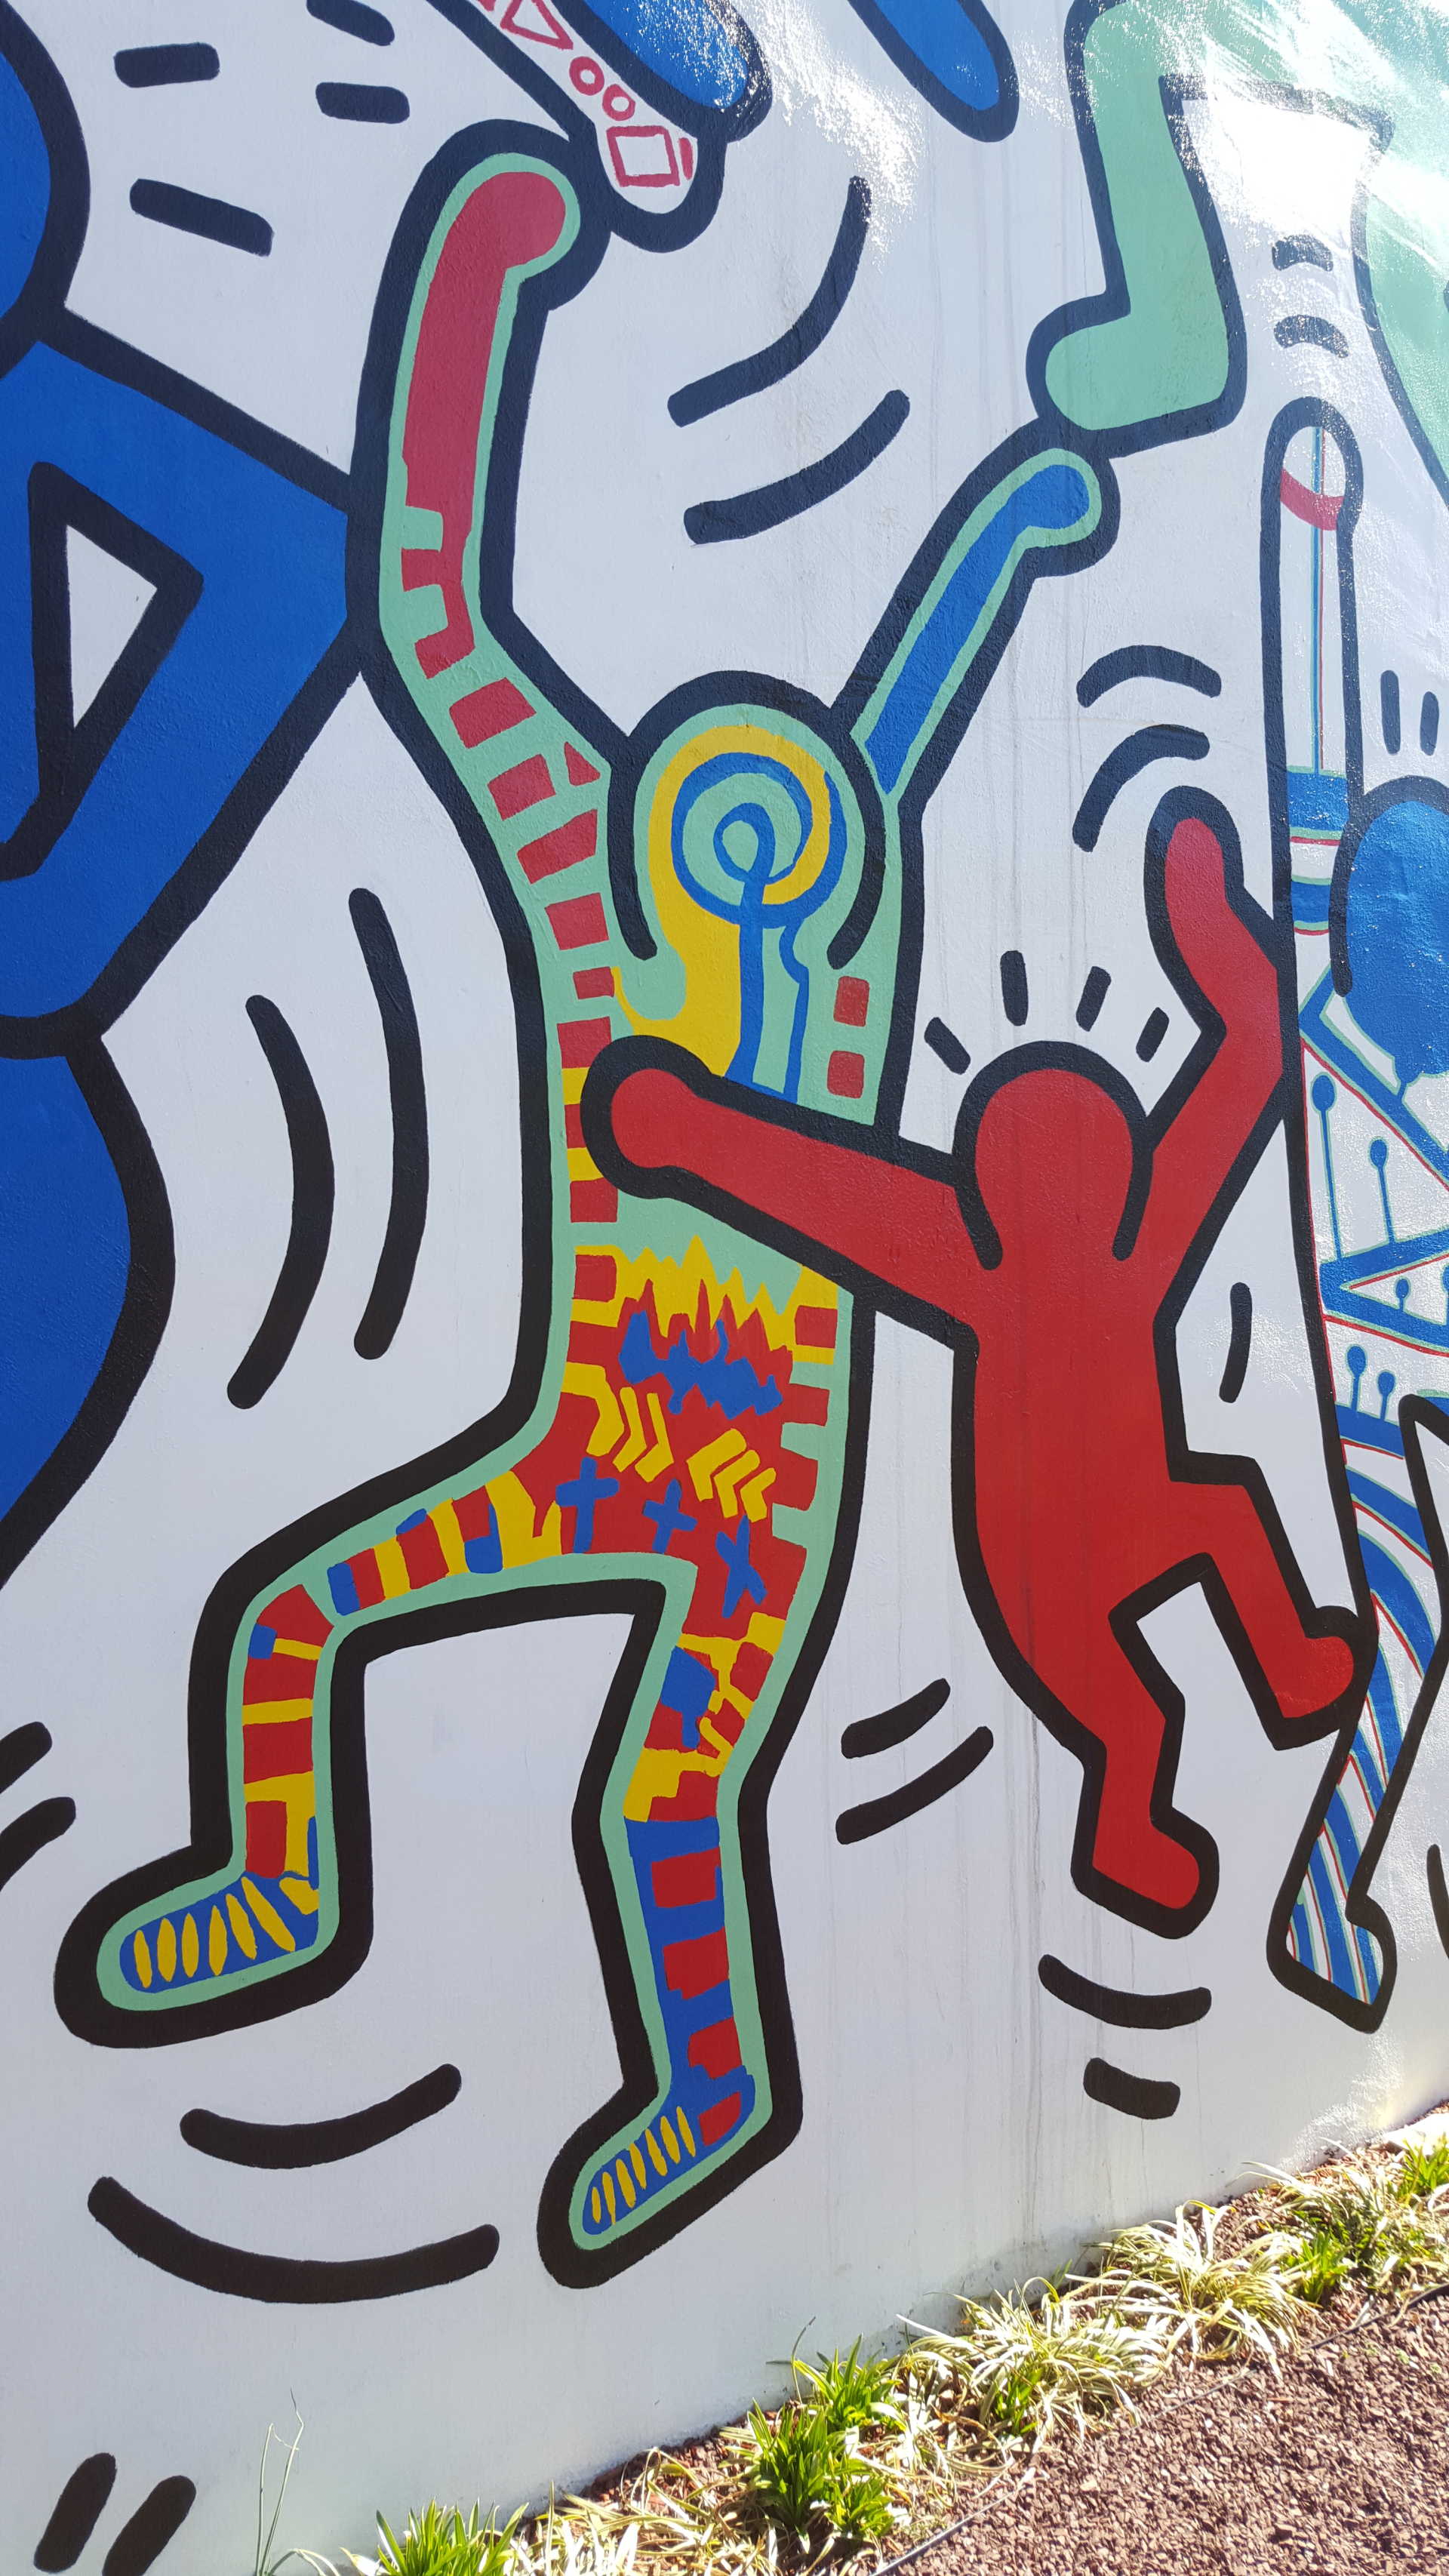 We the Youth Keith Haring